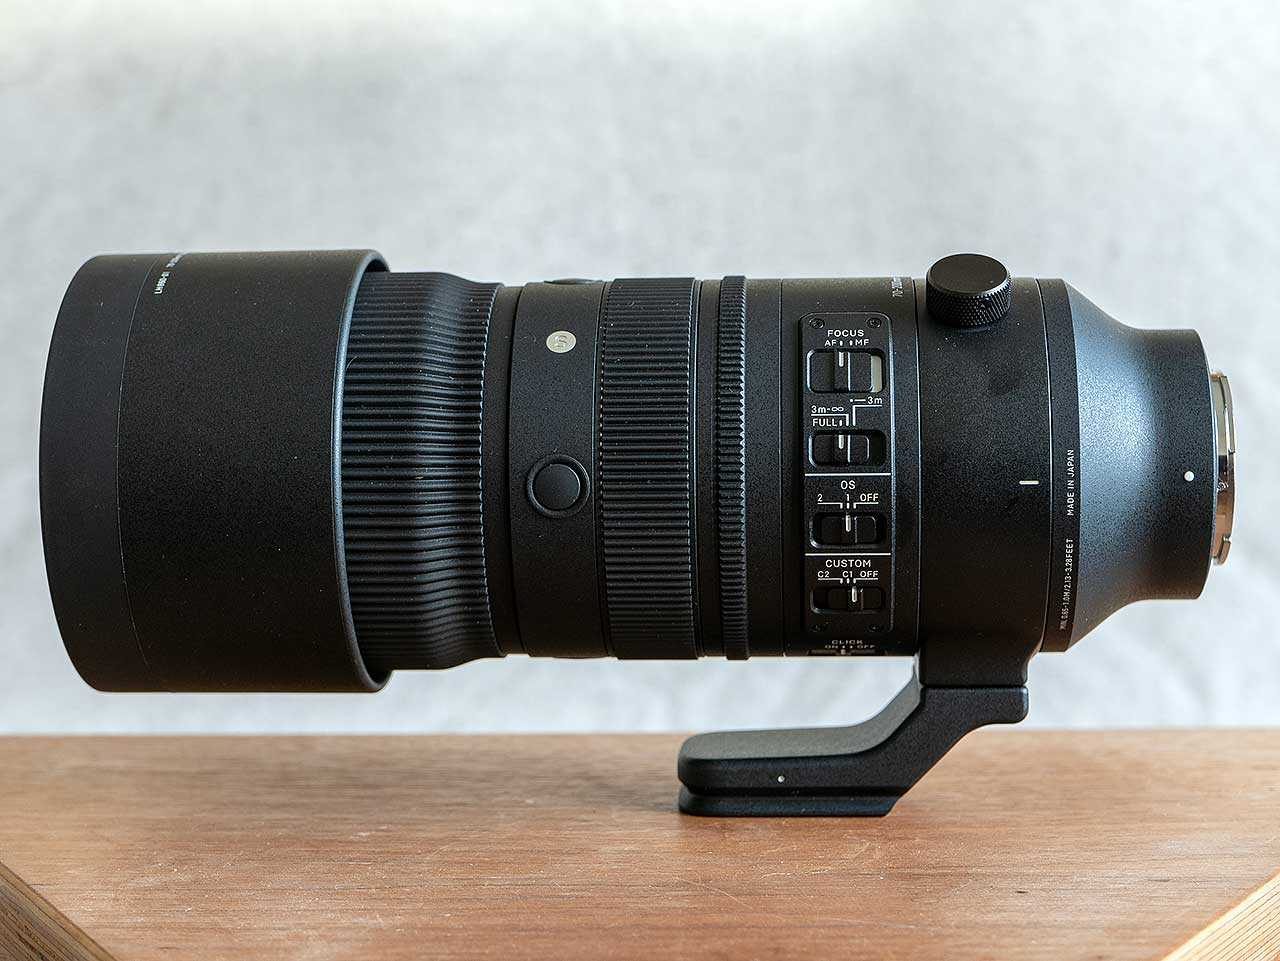 First Look: SIGMA 70-200mm F2.8 DG DN OS Sports Lens for Sony E-mount